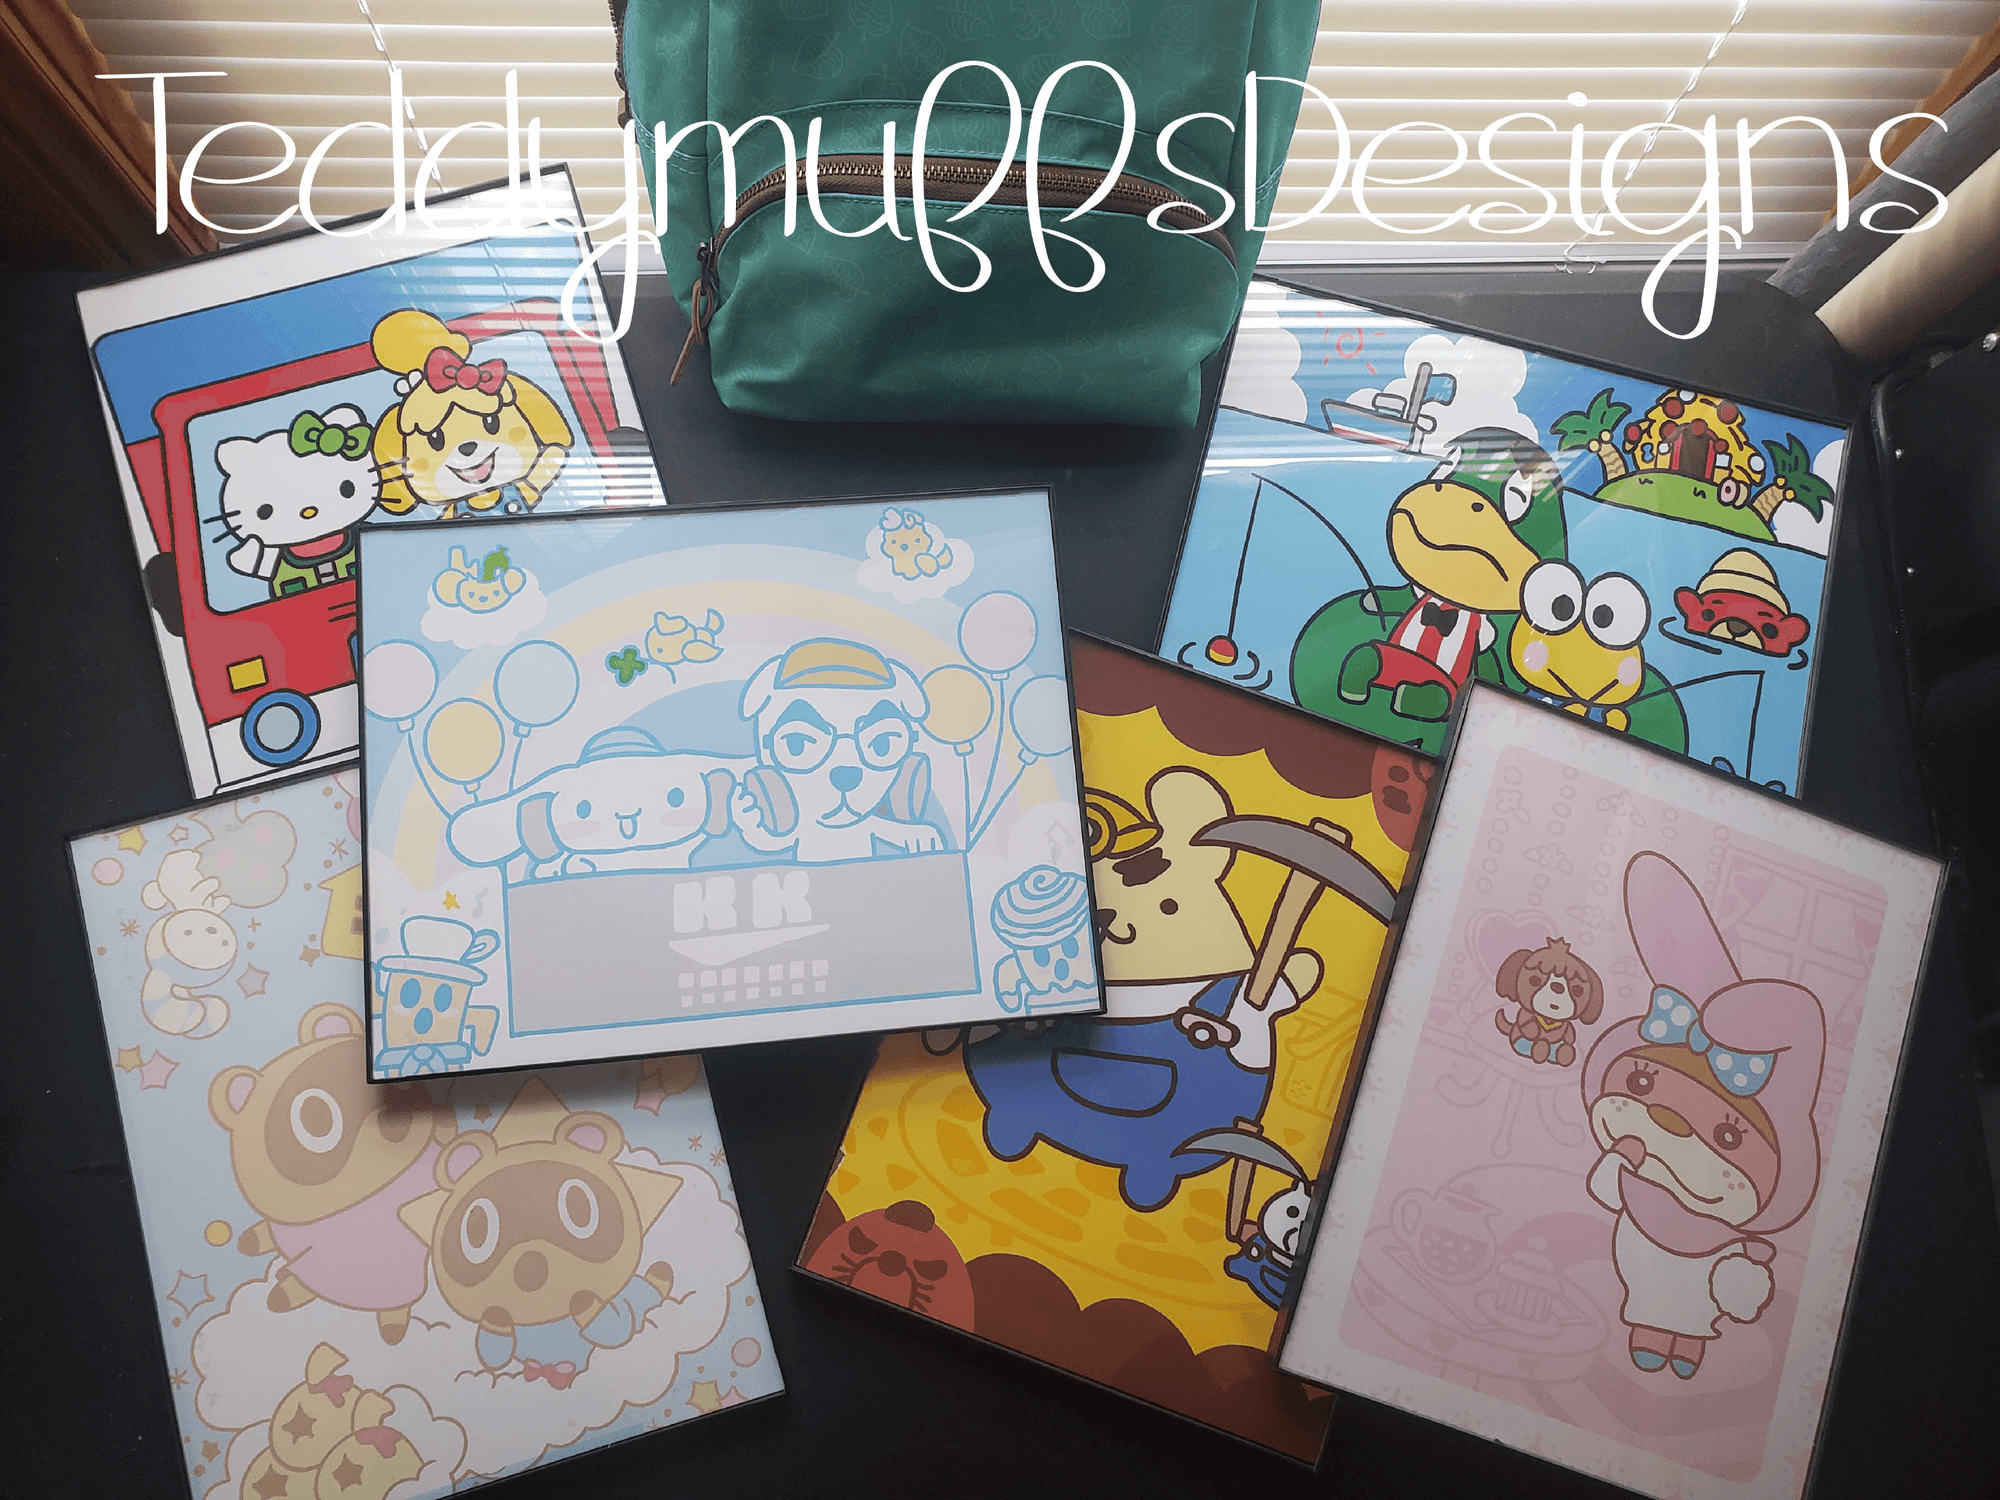 Sanrio Posters from Animal Crossing - Teddymuffs Designs